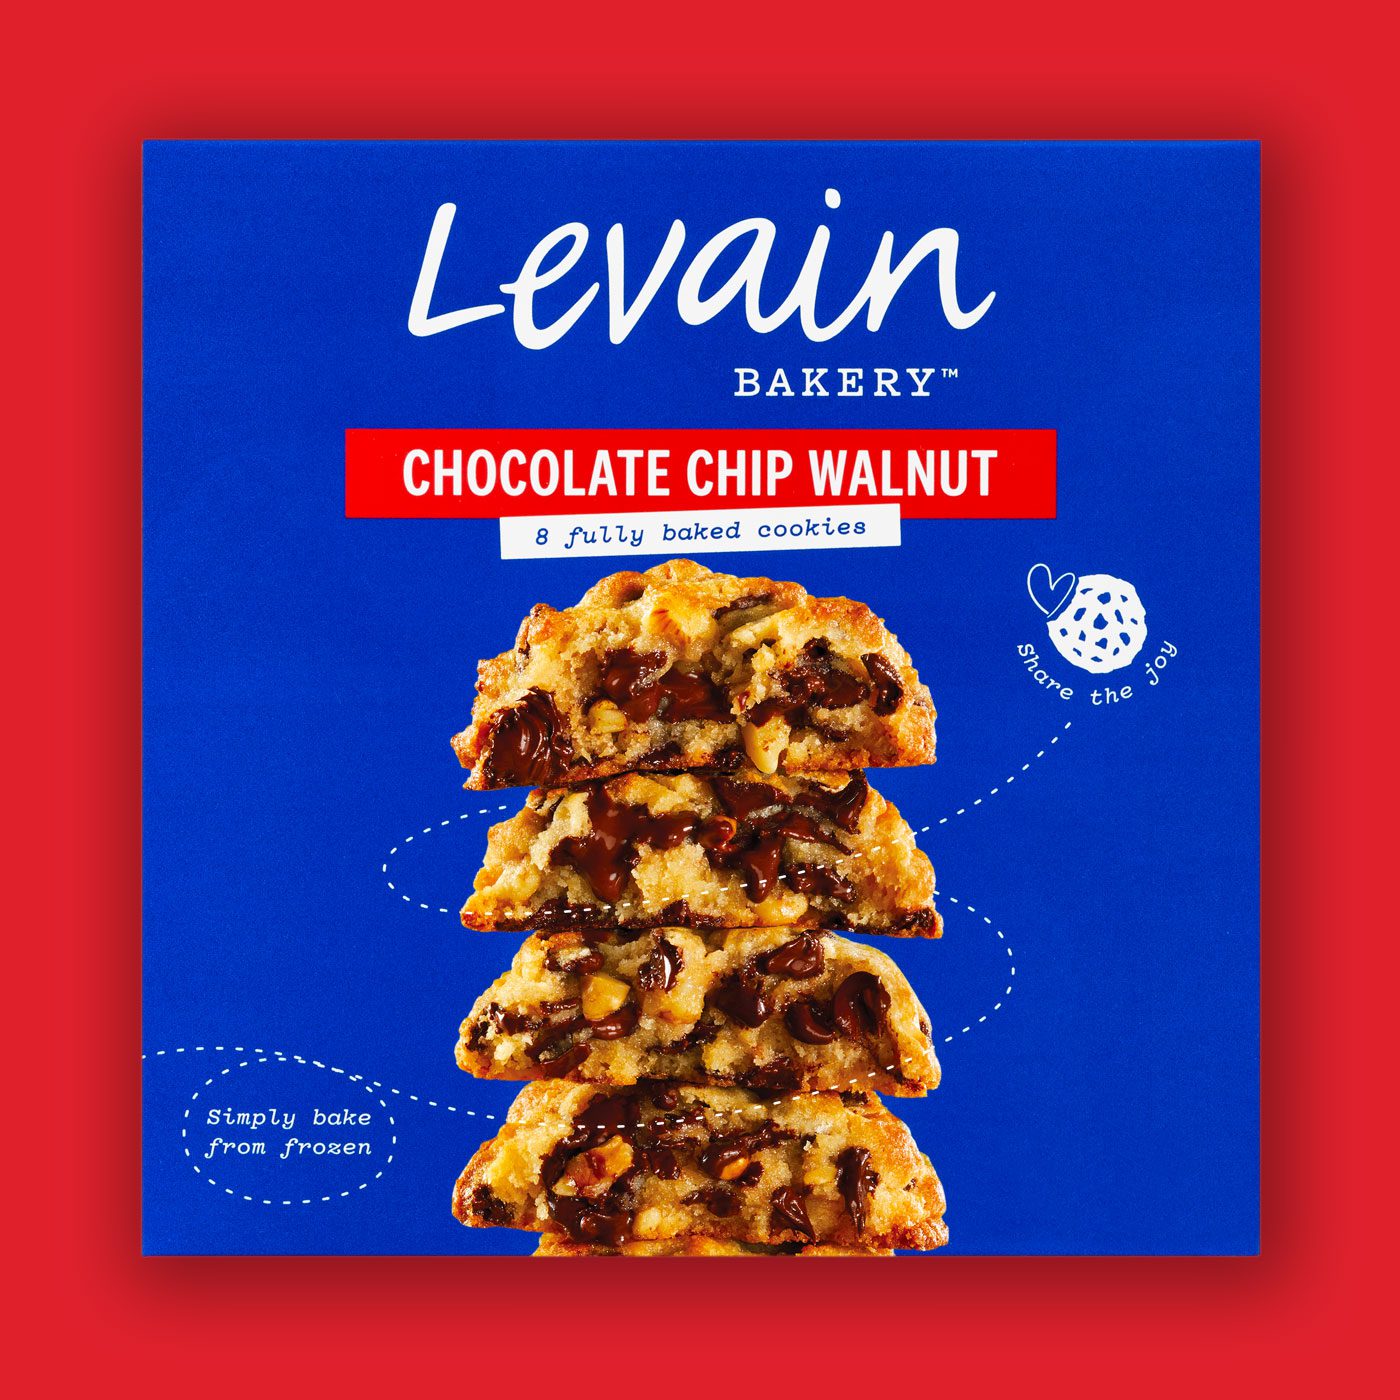 Front face of Levain Bakery Chocolate Chip Walnut Frozen Cookies retail packaging box. The iconic, Levain rich blue box features the Levain typographic logo, red flavor band, "8 fully baked cookies" descriptor, a photographic image of a melty open cookie stack, and their signature cookie heart icon with "share the joy".